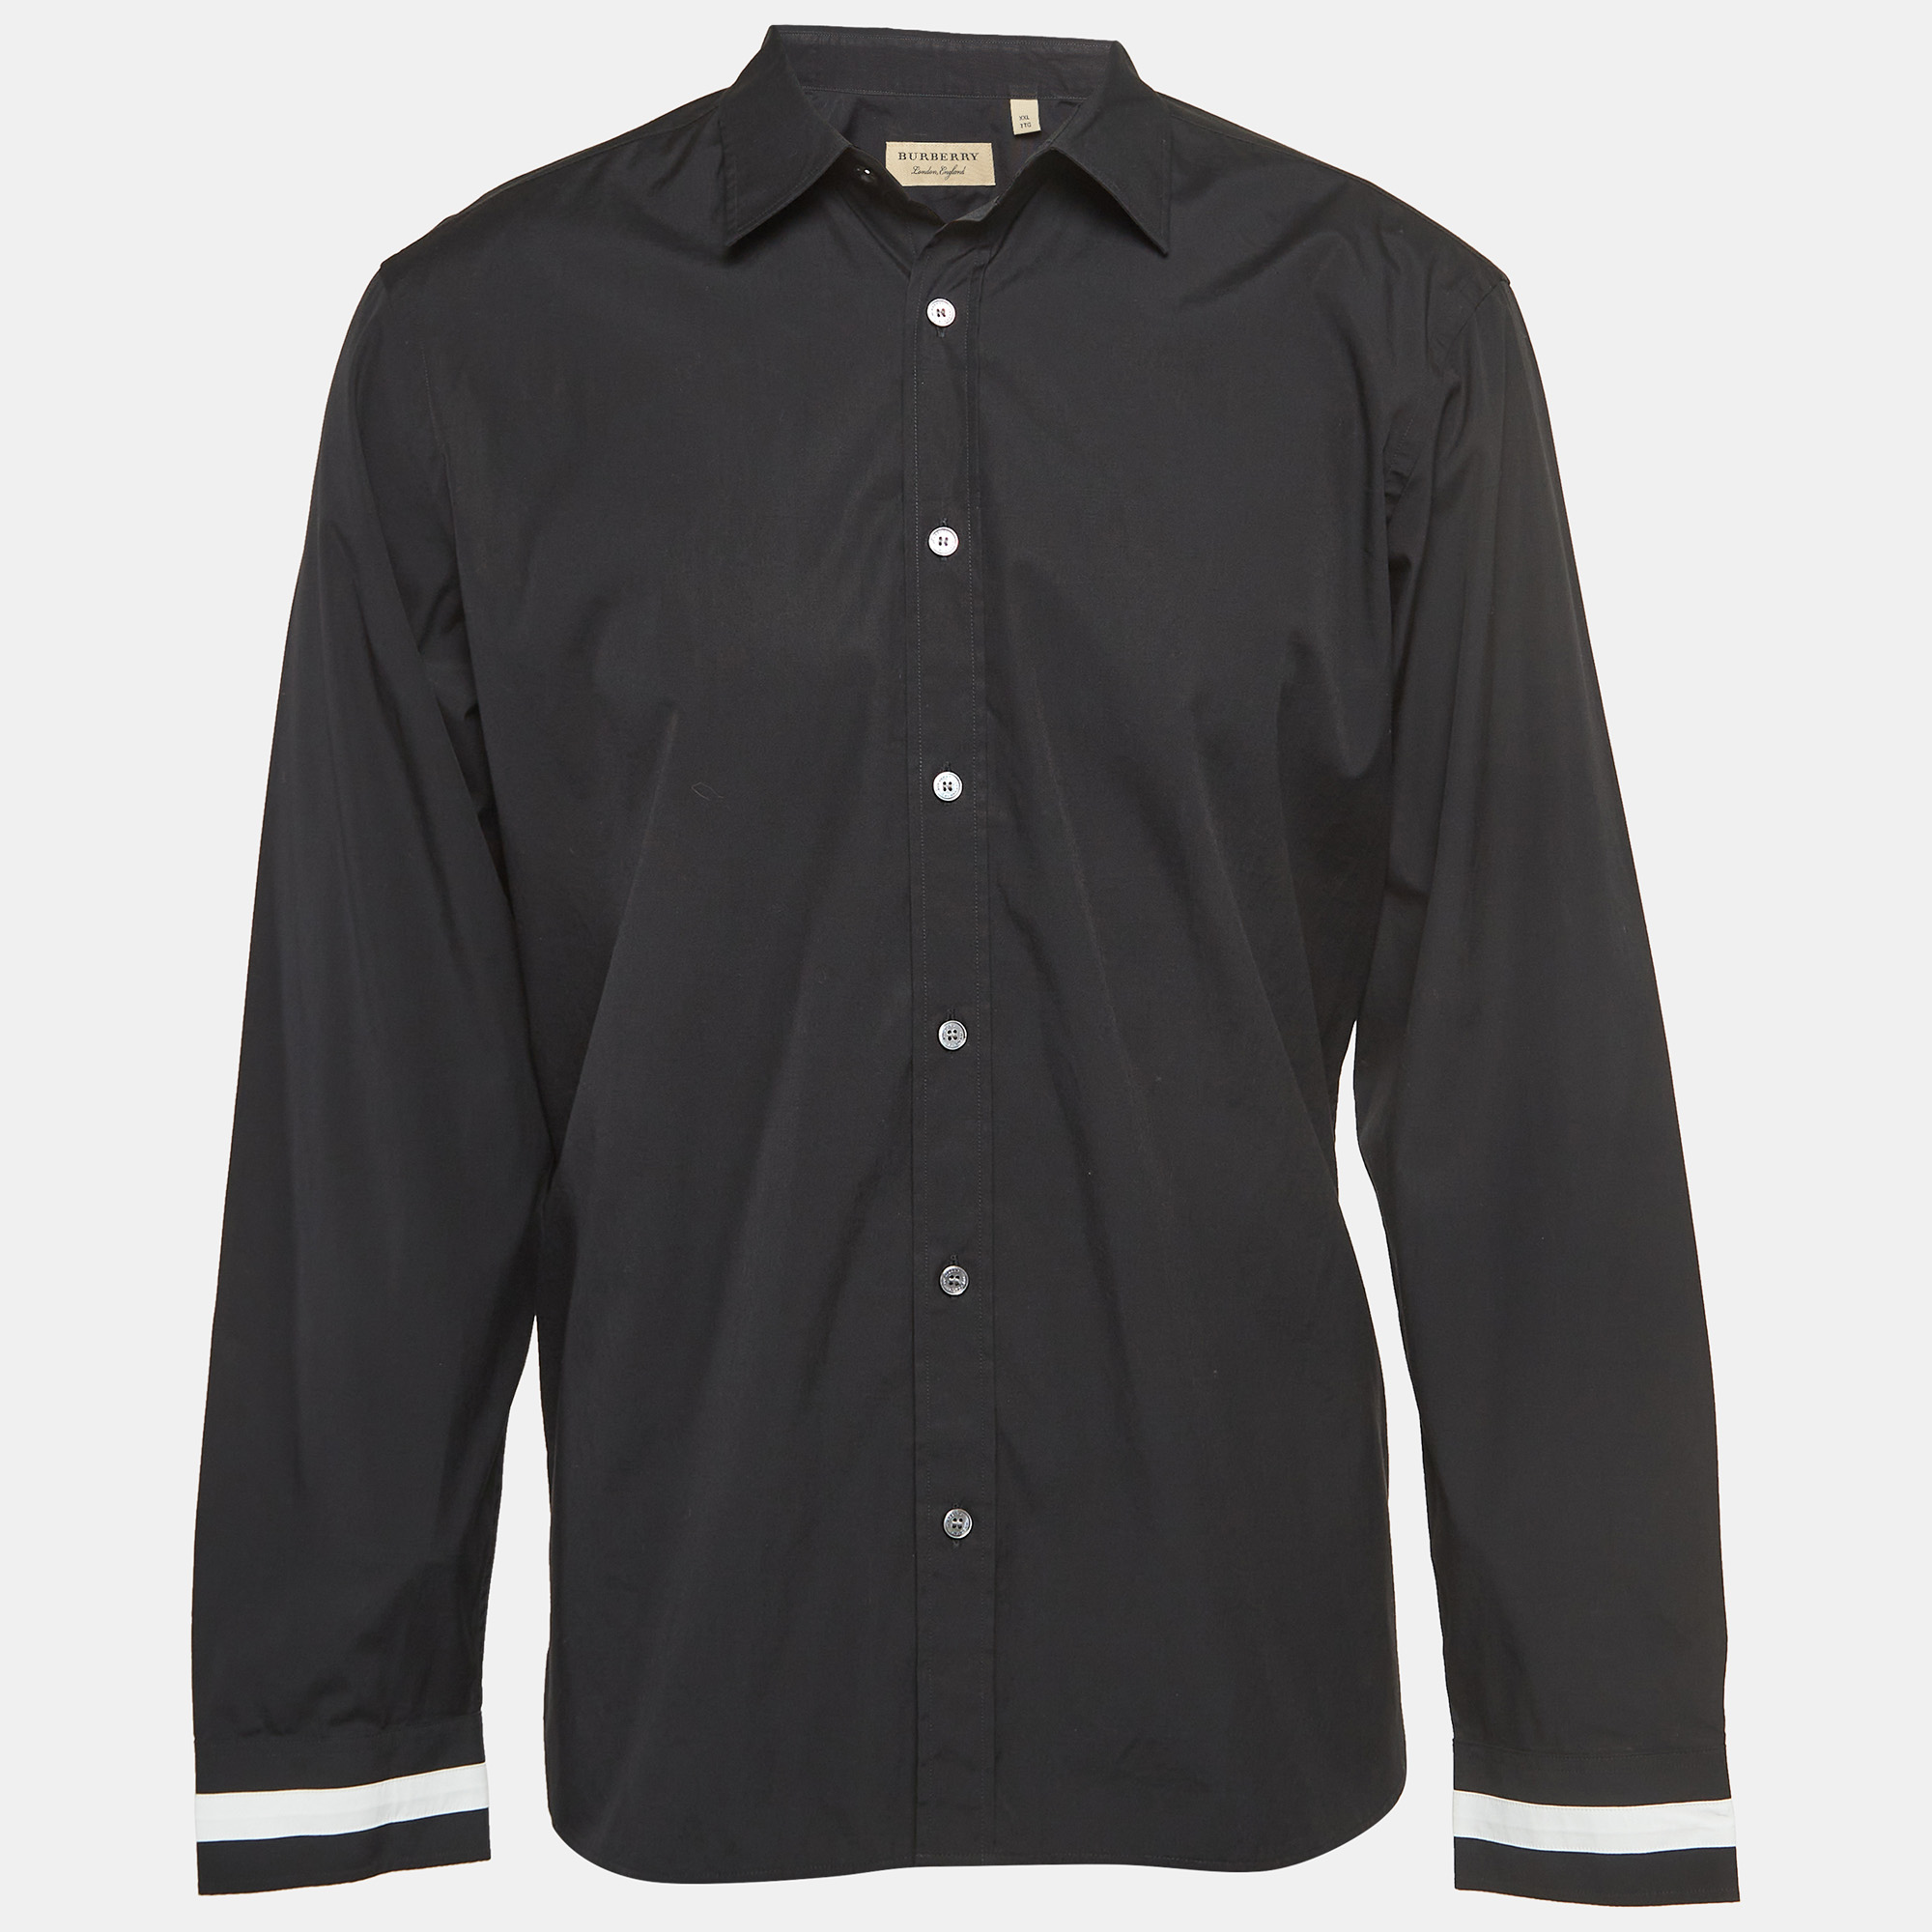 Shirts are an indispensable part of a wardrobe so this brand brings you a creation that is both versatile and stylish. It has been tailored from quality material in a versatile shade. The shirt is detailed with signature elements and a comfortable fit.